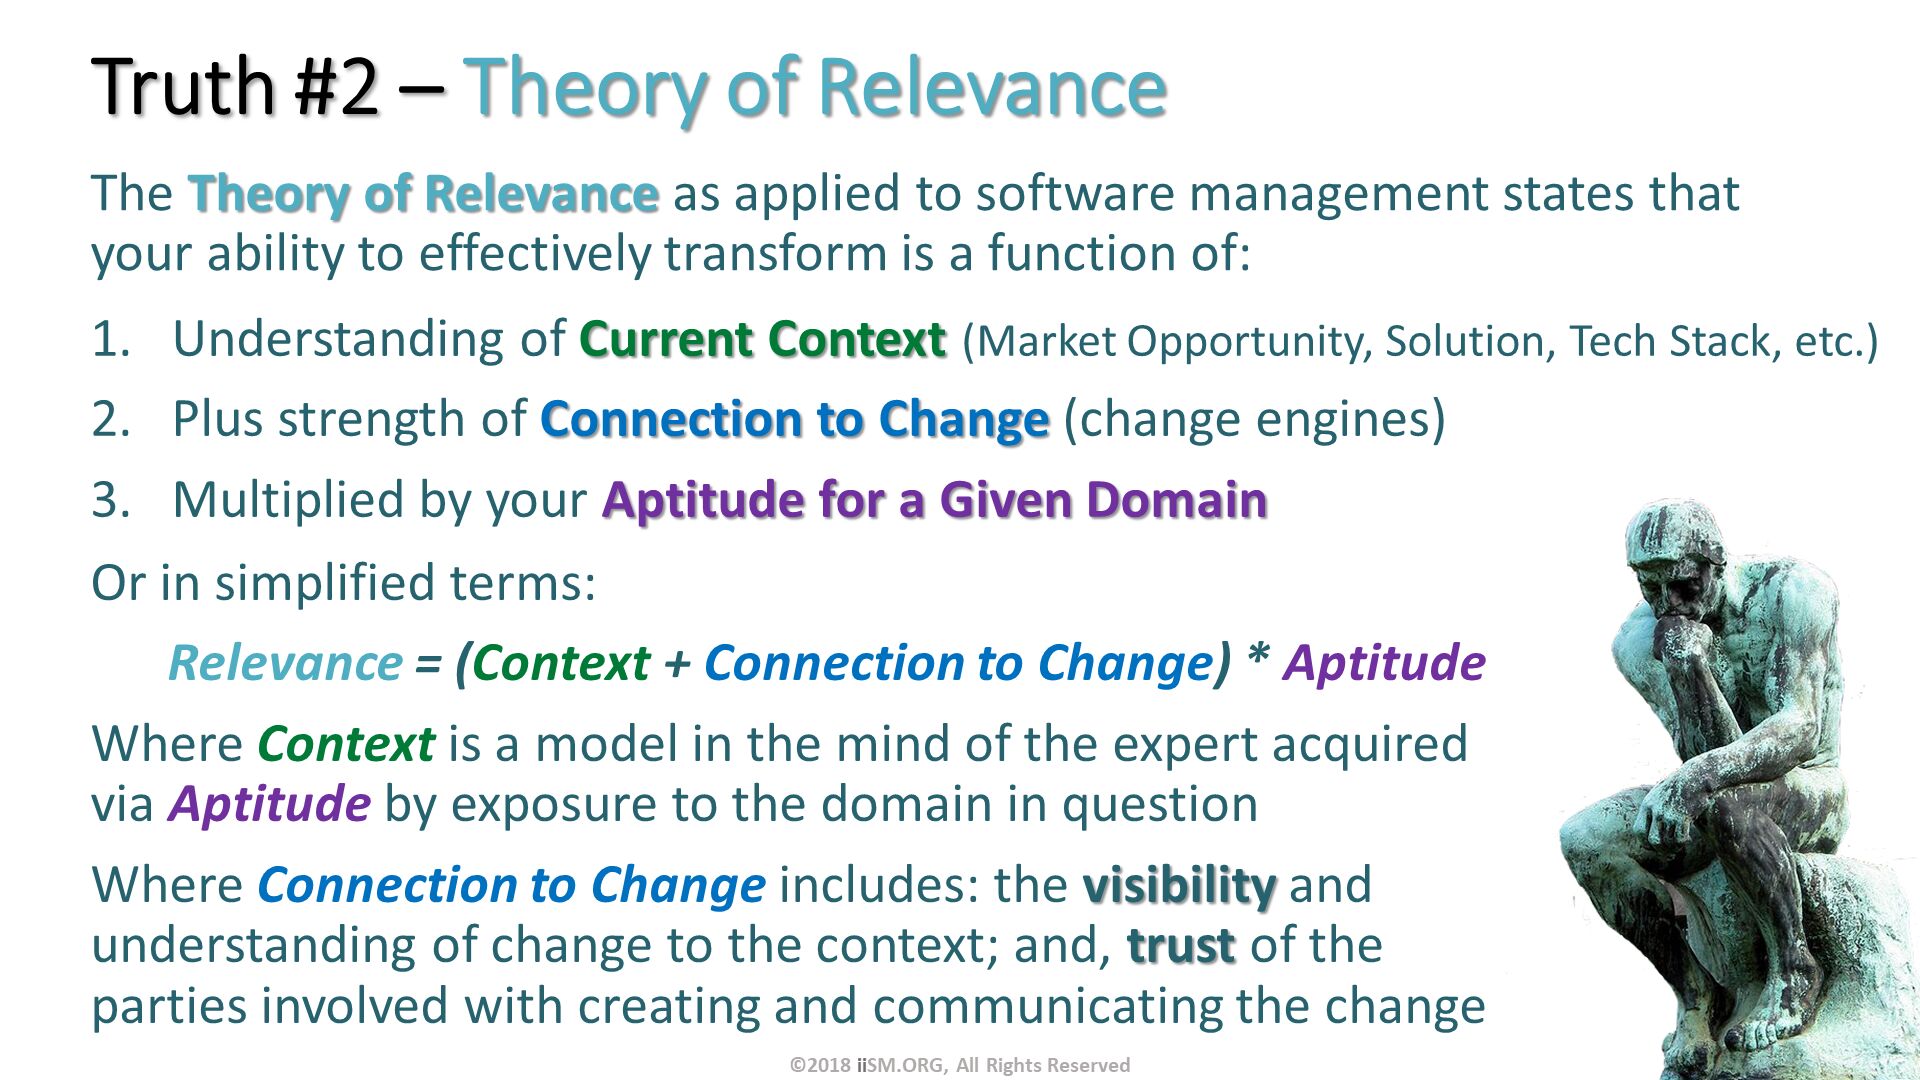 Truth #2 – Theory of Relevance . The Theory of Relevance as applied to software management states that your ability to effectively transform is a function of:. Understanding of Current Context (Market Opportunity, Solution, Tech Stack, etc.)  
Plus strength of Connection to Change (change engines)
Multiplied by your Aptitude for a Given Domain. Or in simplified terms:
      Relevance = (Context + Connection to Change) * Aptitude 
Where Context is a model in the mind of the expert acquired via Aptitude by exposure to the domain in question
Where Connection to Change includes: the visibility and understanding of change to the context; and, trust of the parties involved with creating and communicating the change

. ©2018 iiSM.ORG, All Rights Reserved. 